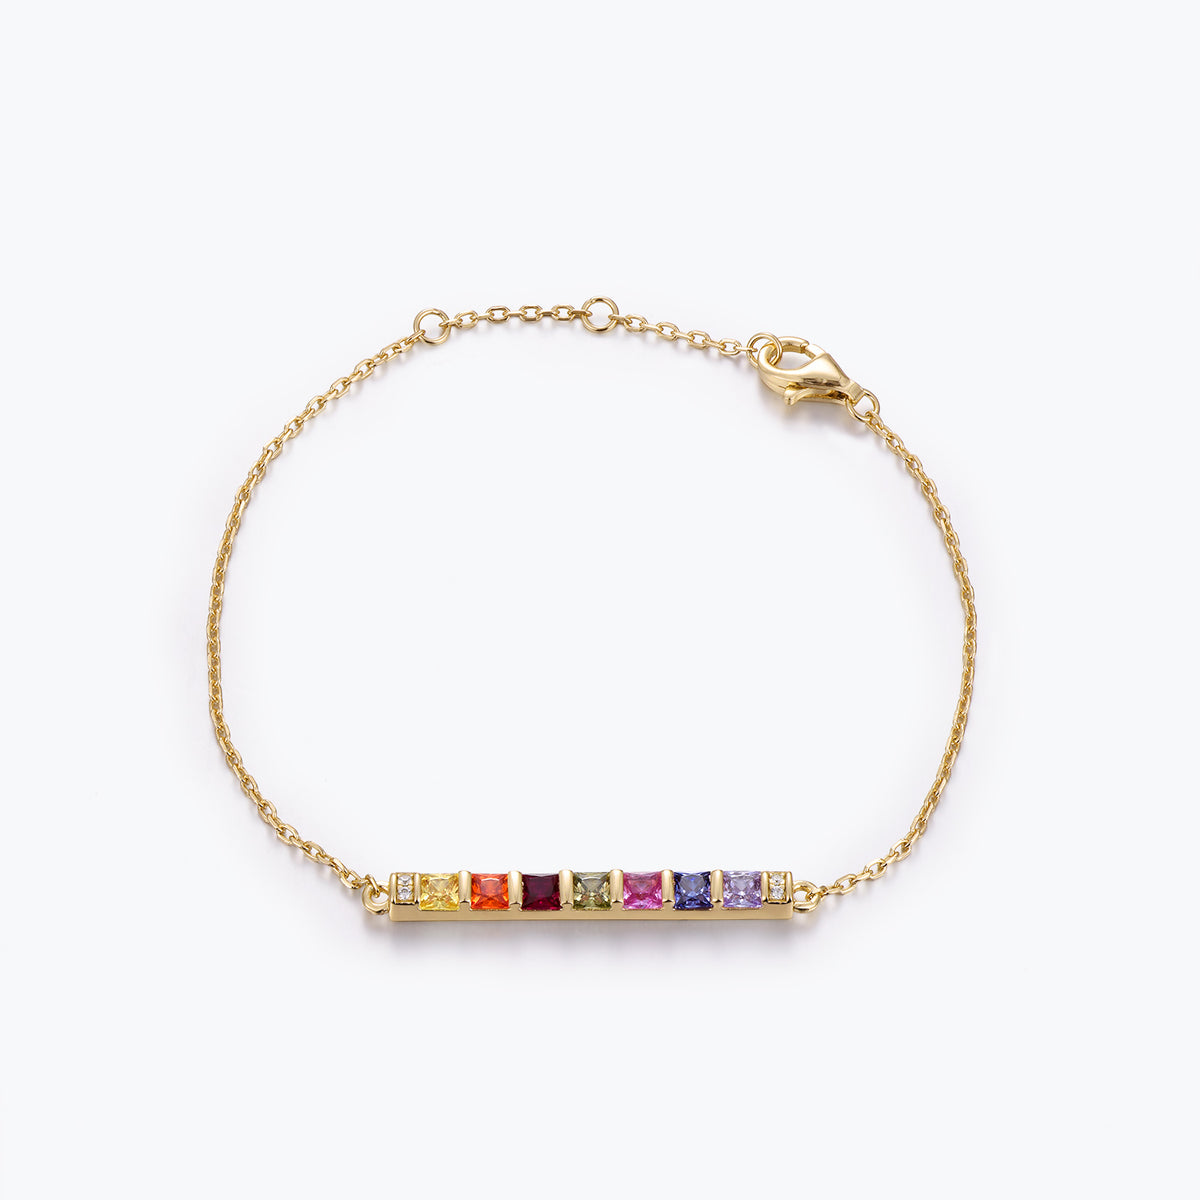 Dissoo® Multi-Gemstone Delicate Bar Bracelet in 14K Yellow/Rose Gold Vermeil,and Sterling Silver